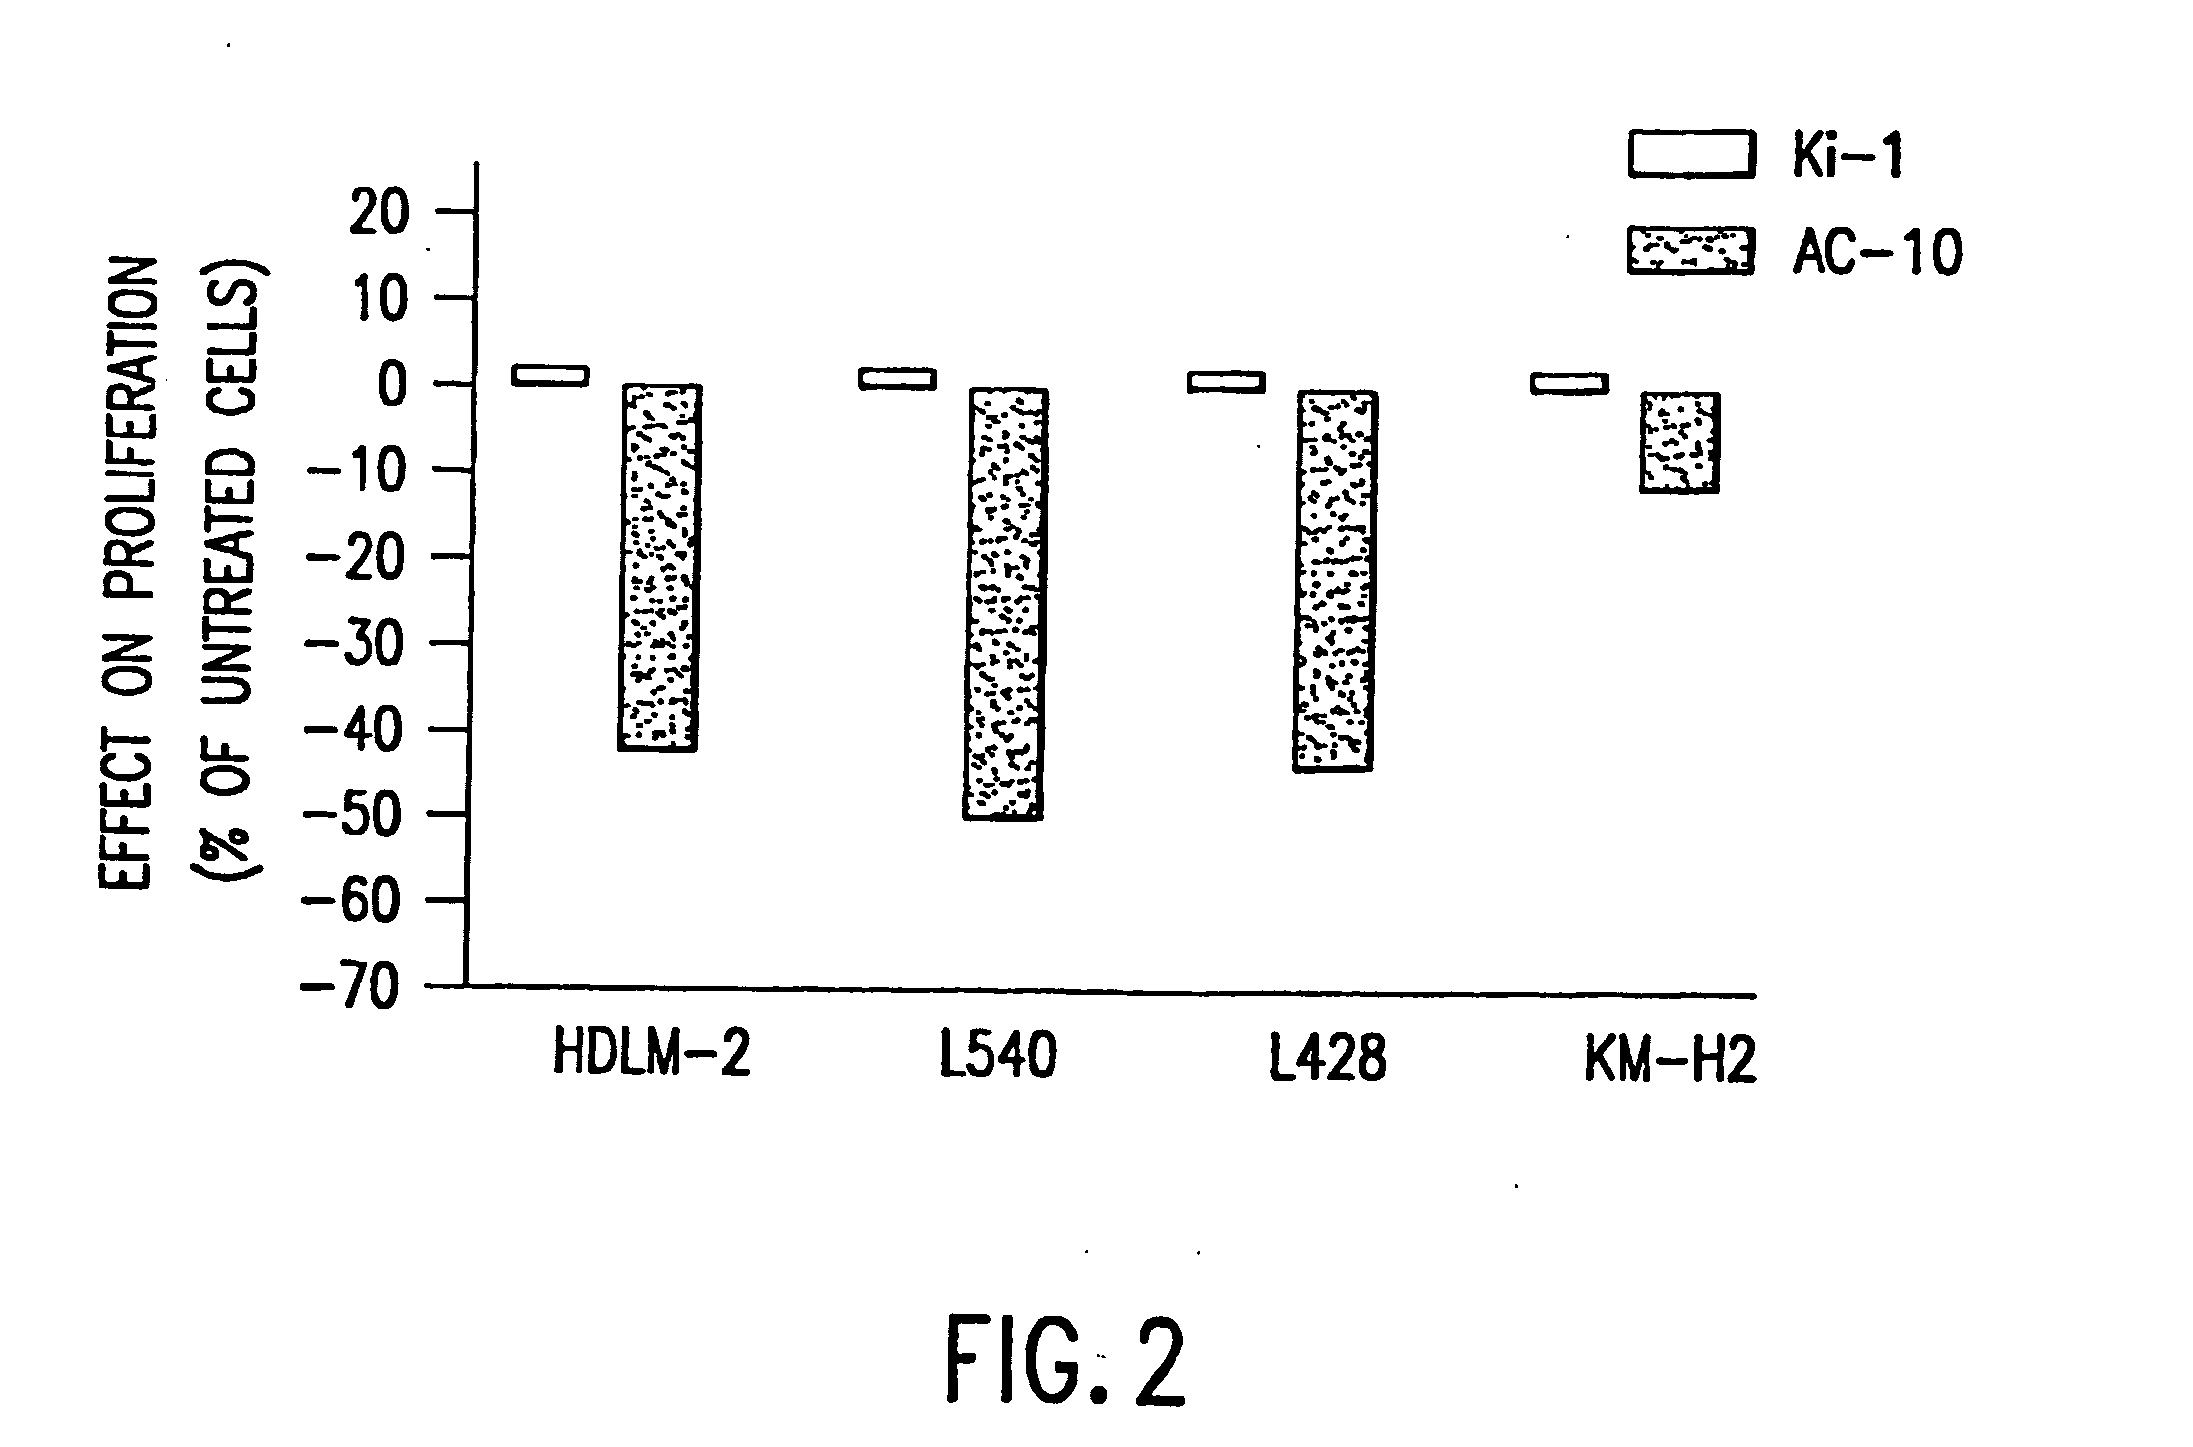 Recombinant Anti-Cd30 Antibodies and Uses Thereof